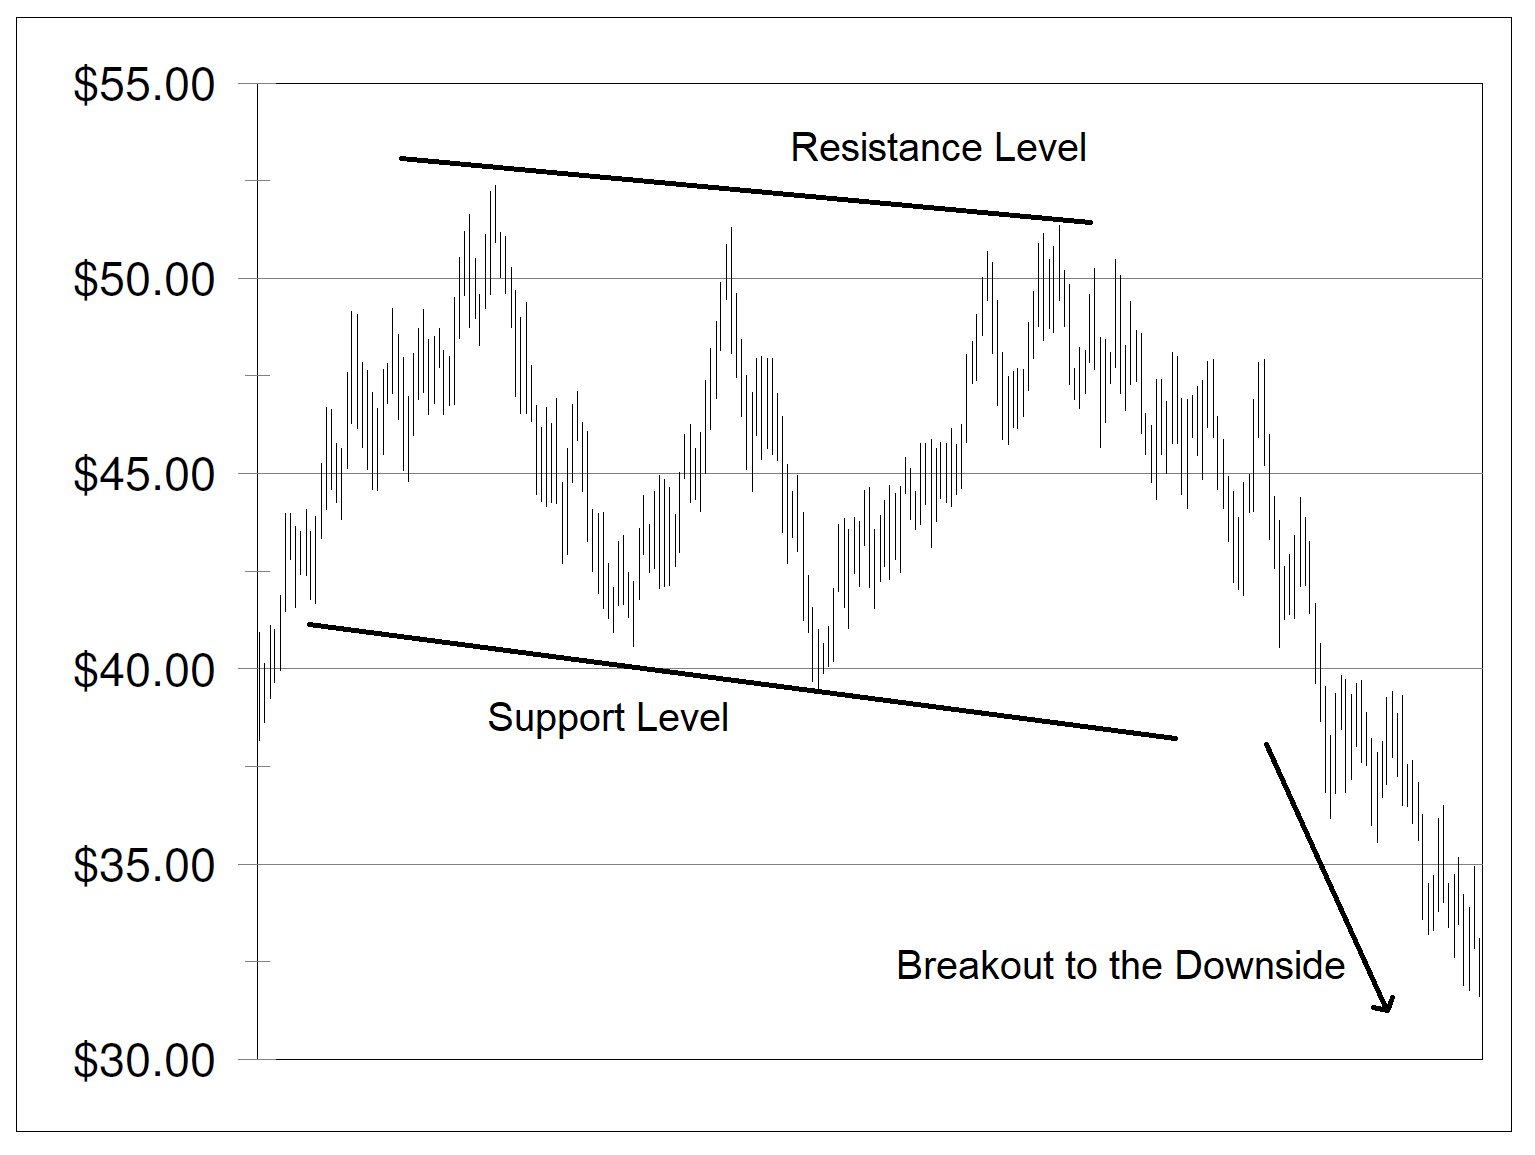 Resistance and support levels and subsequent breakout to the downside, tools of Technical Analysis